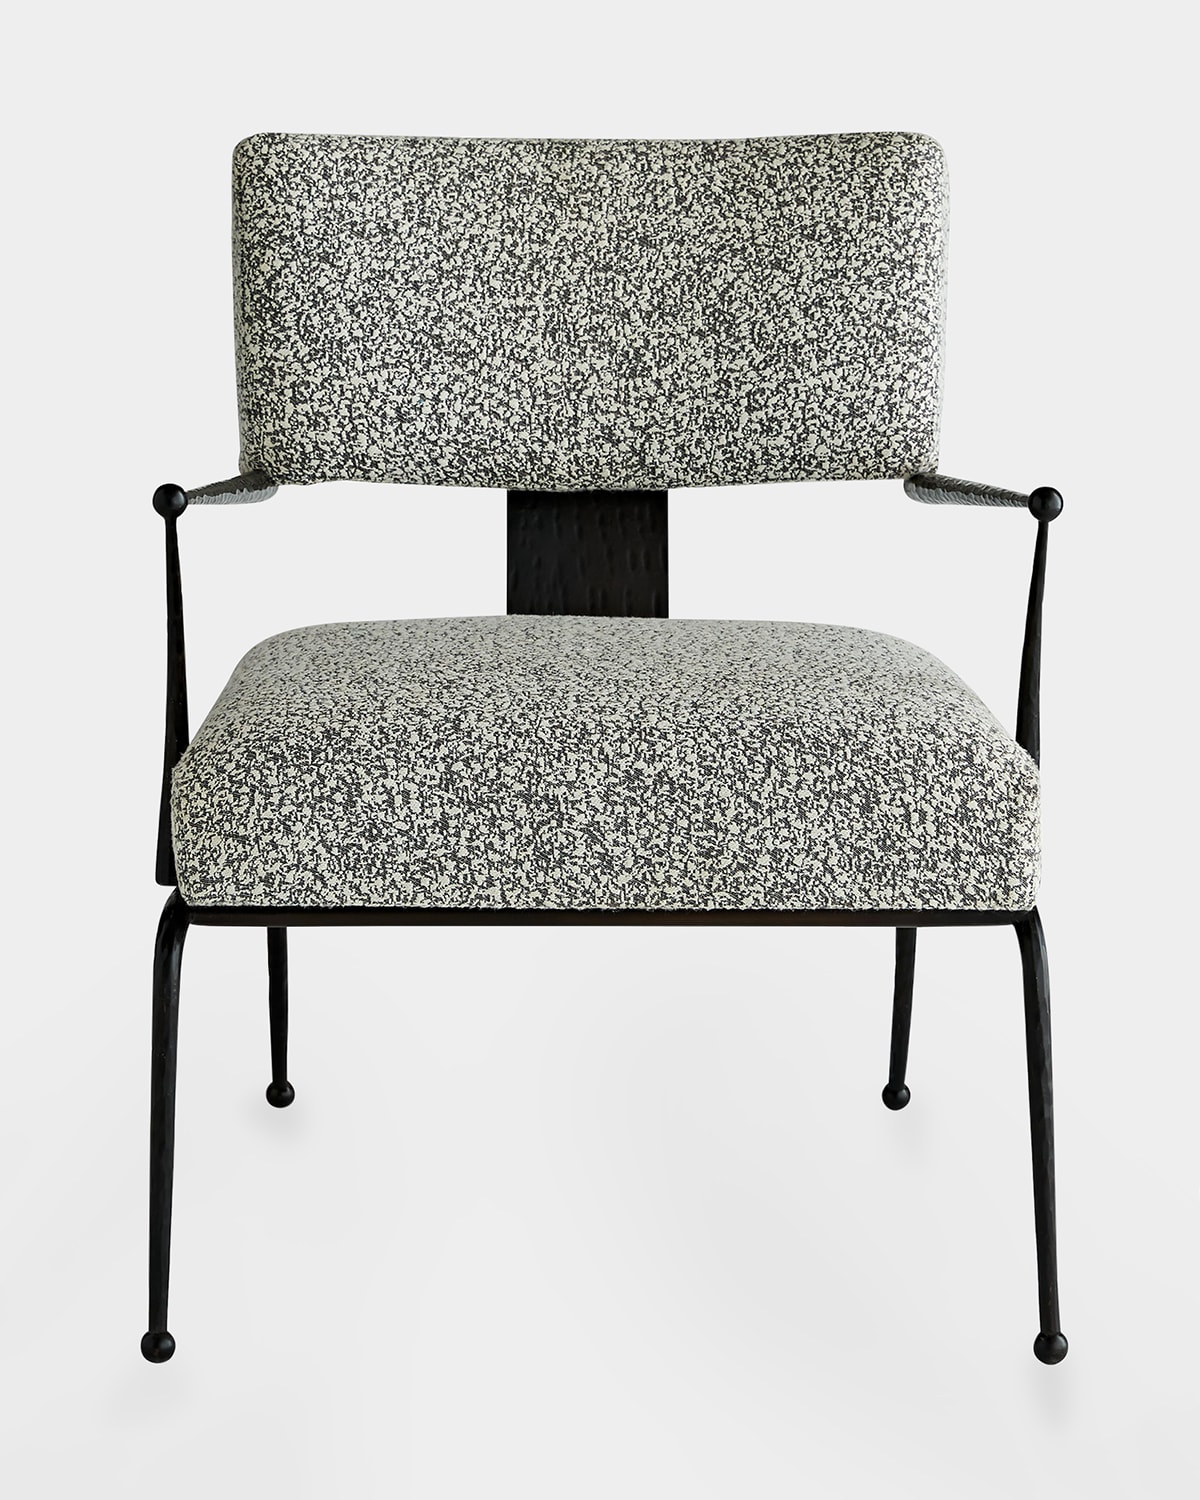 ARTERIORS WALLACE PITCH TEXTURED CHAIR